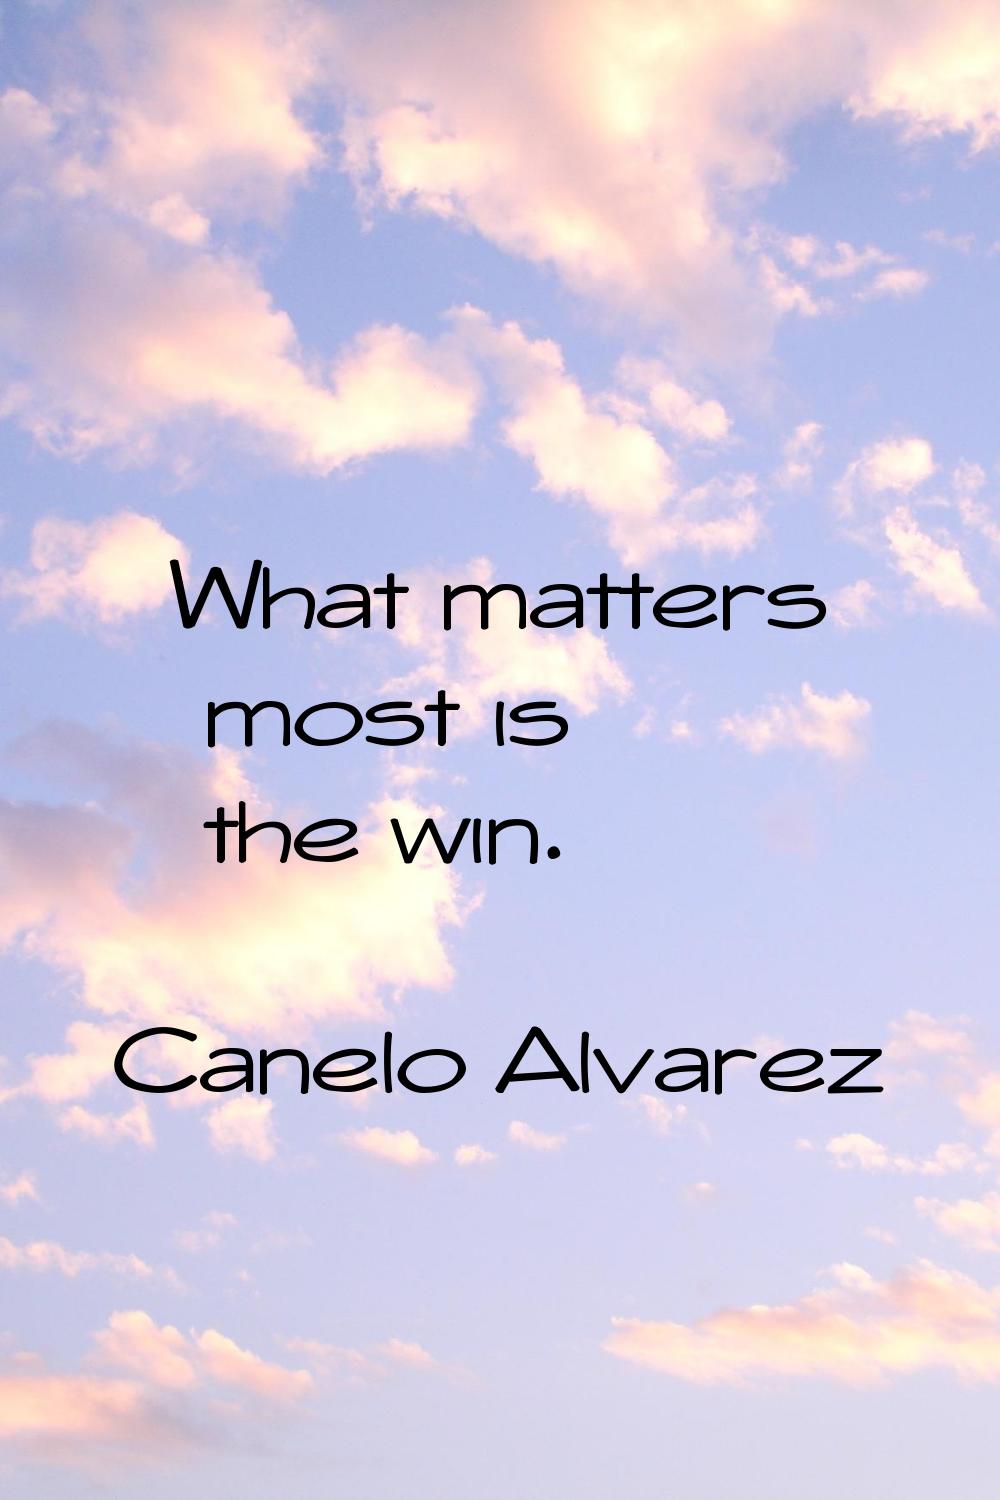 What matters most is the win.